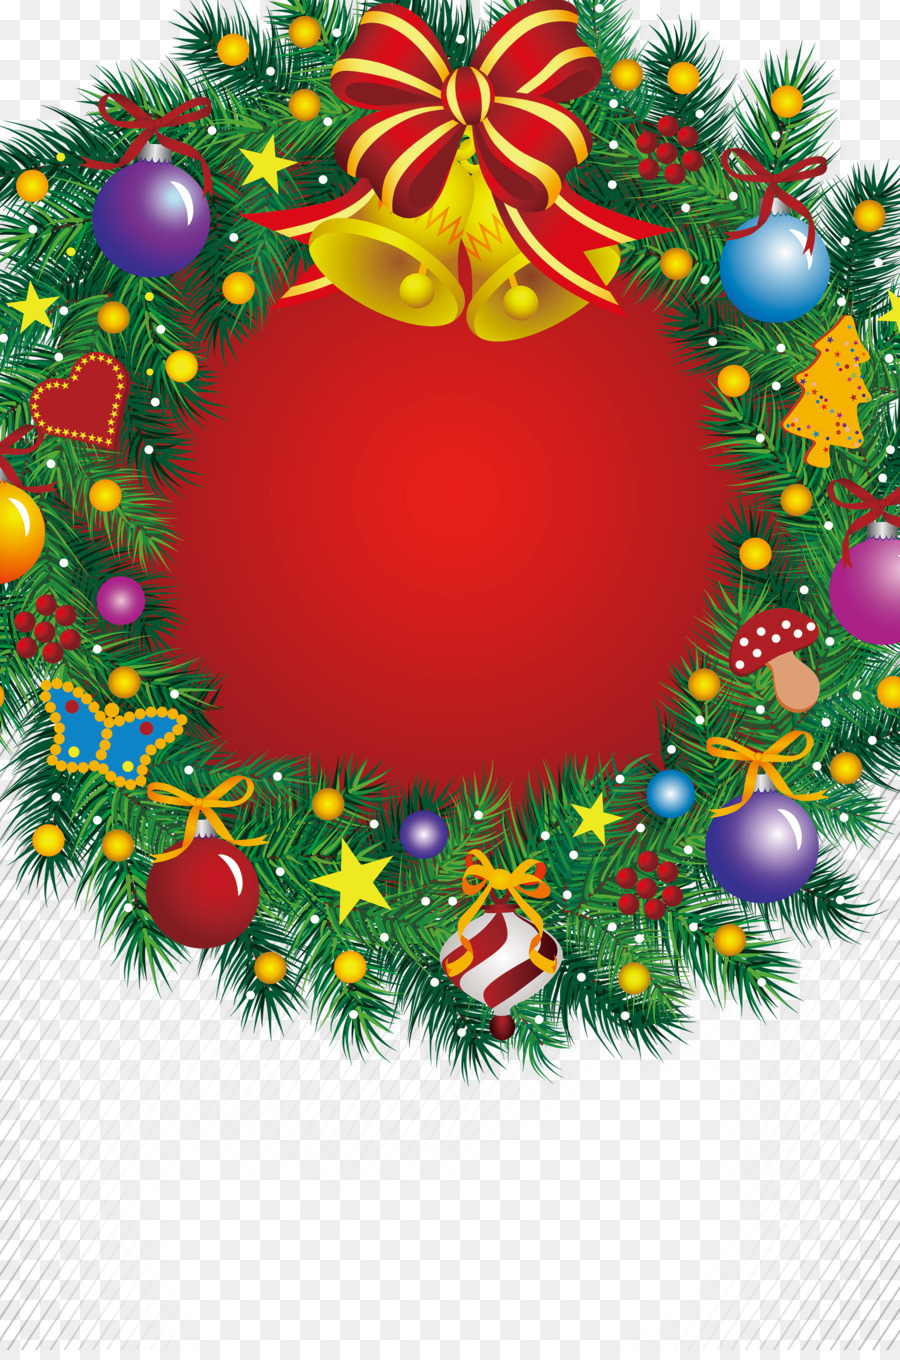 Christmas Wreath Clip art - Creative Christmas png download - 1920*2880 - Free Transparent Christmas  png Download.